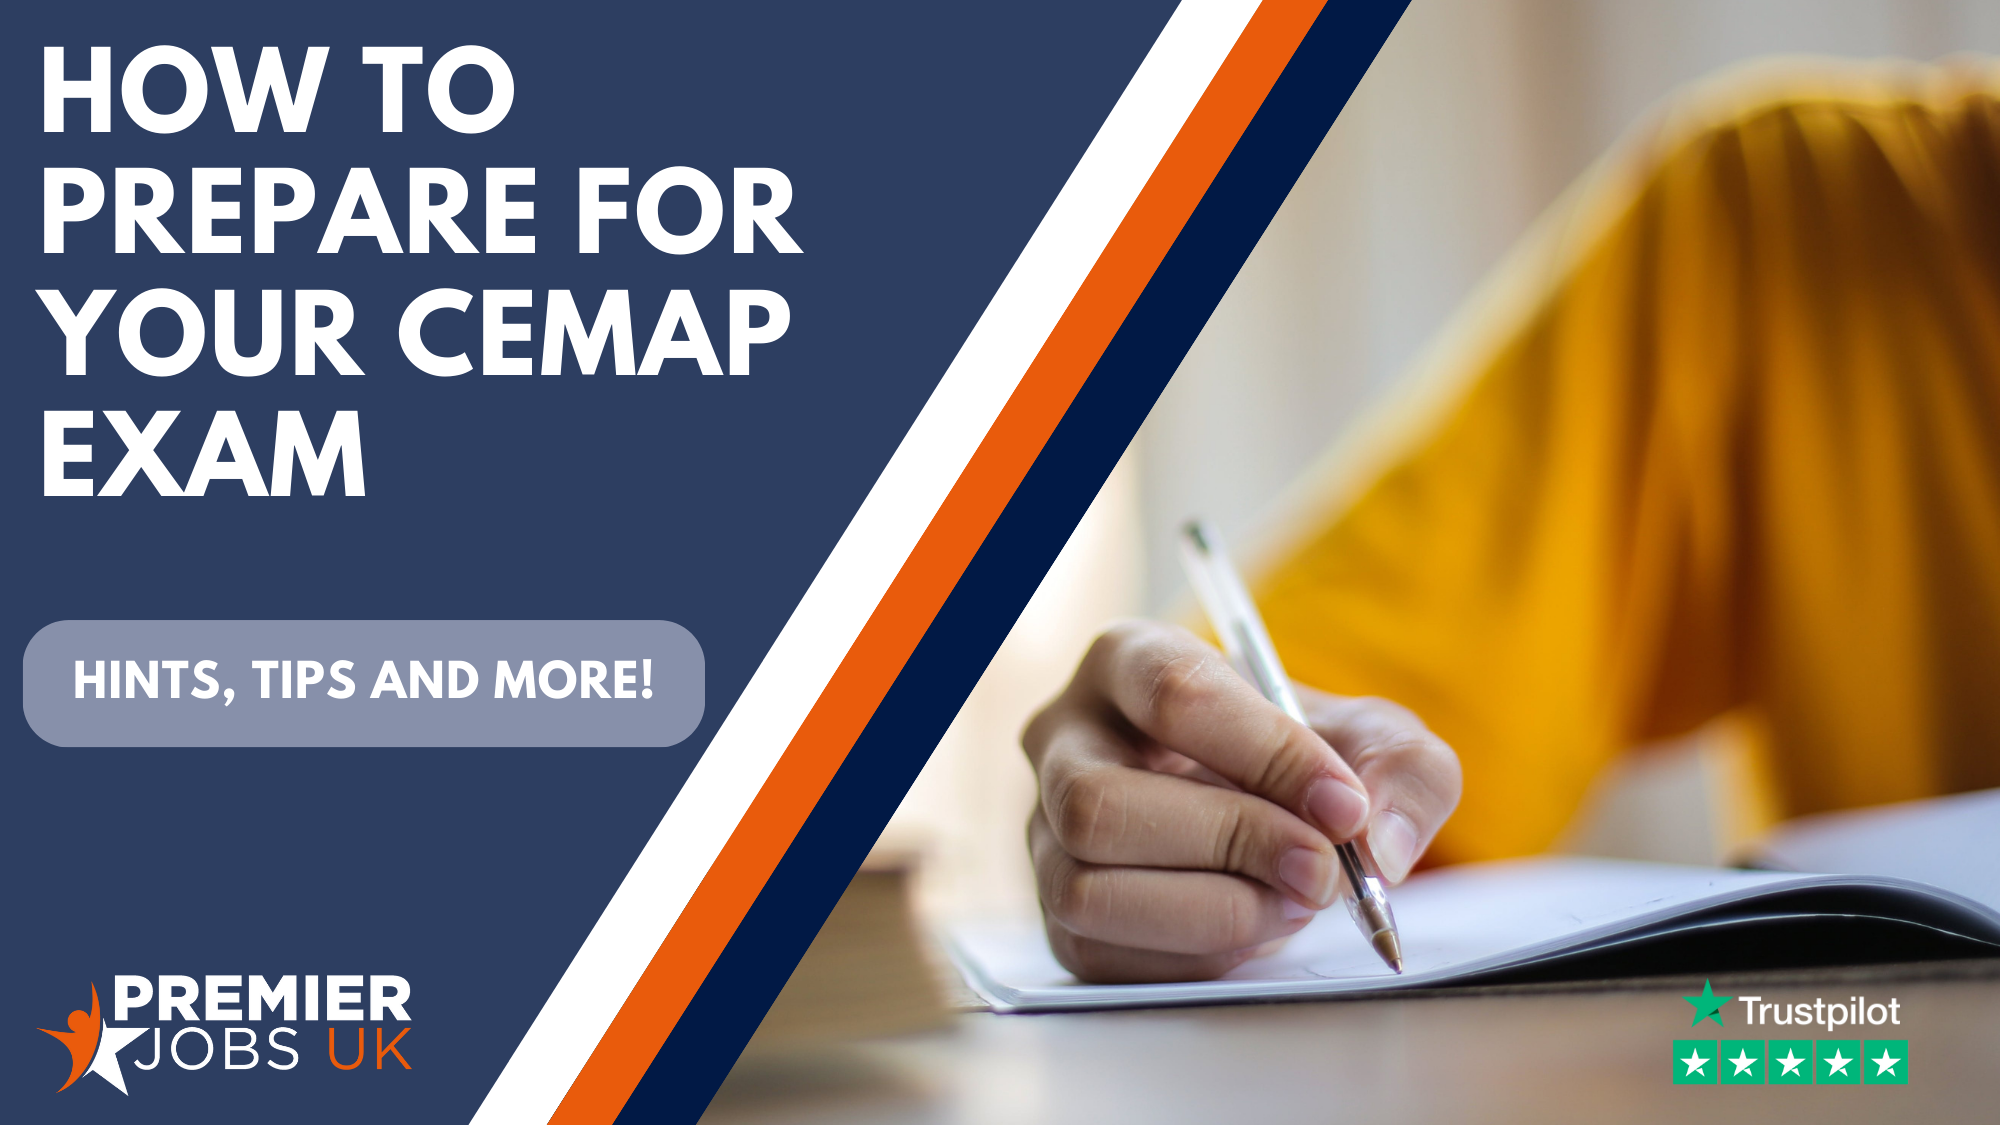 How to prepare for your CeMAP exam